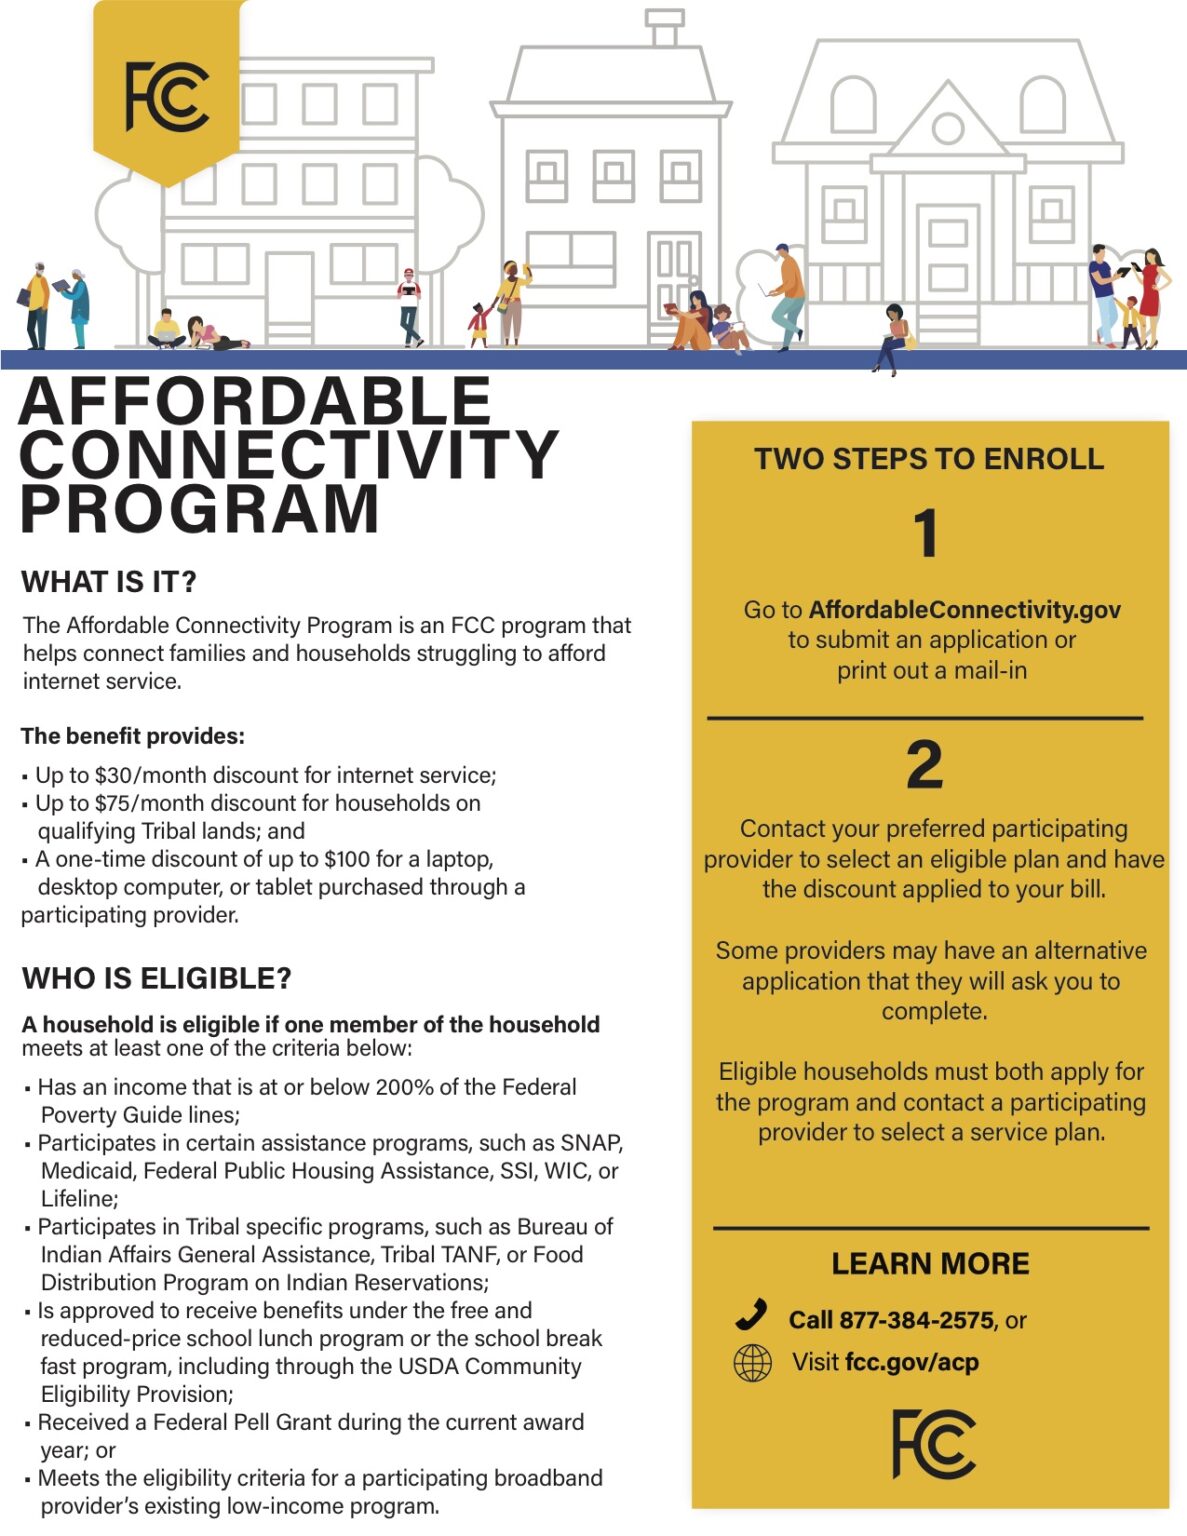 How To Check Your Eligibility For The Affordable Connectivity Program